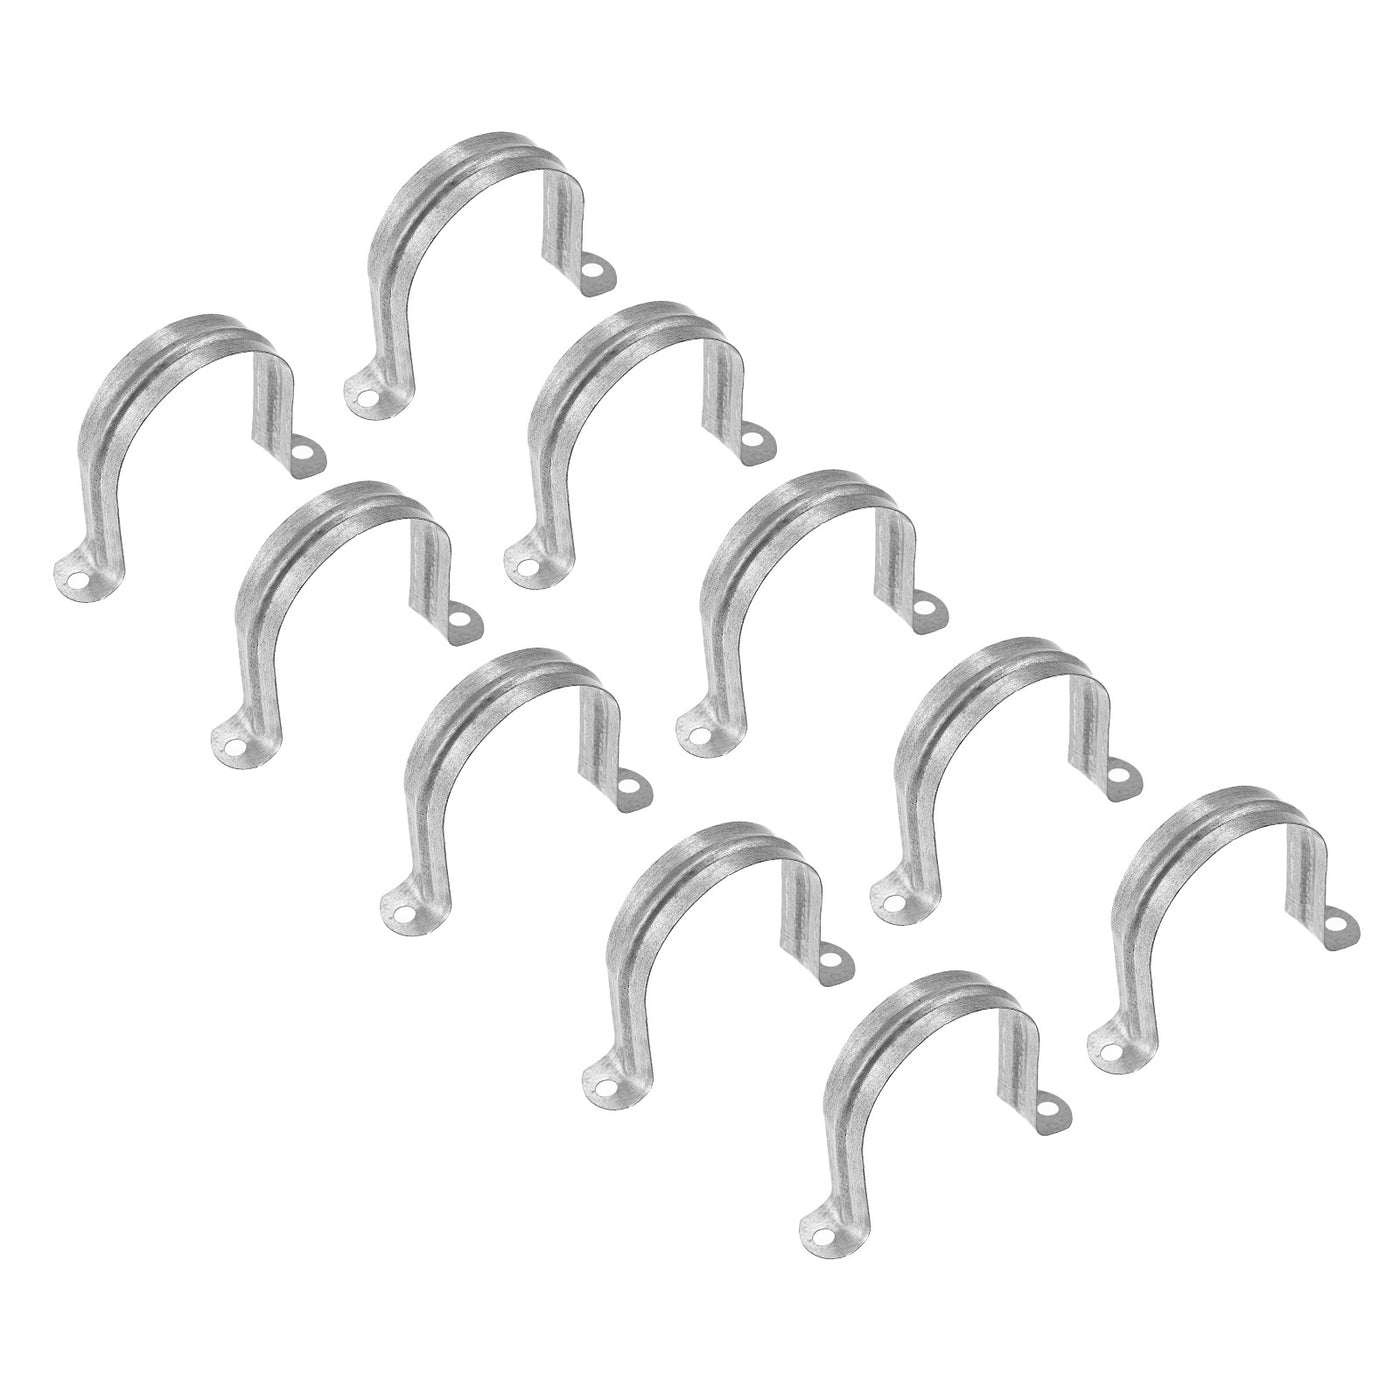 uxcell Uxcell Rigid Pipe Strap 24pcs 2 1/2" (63mm) Carbon Steel U Bracket Tension Tube Clamp